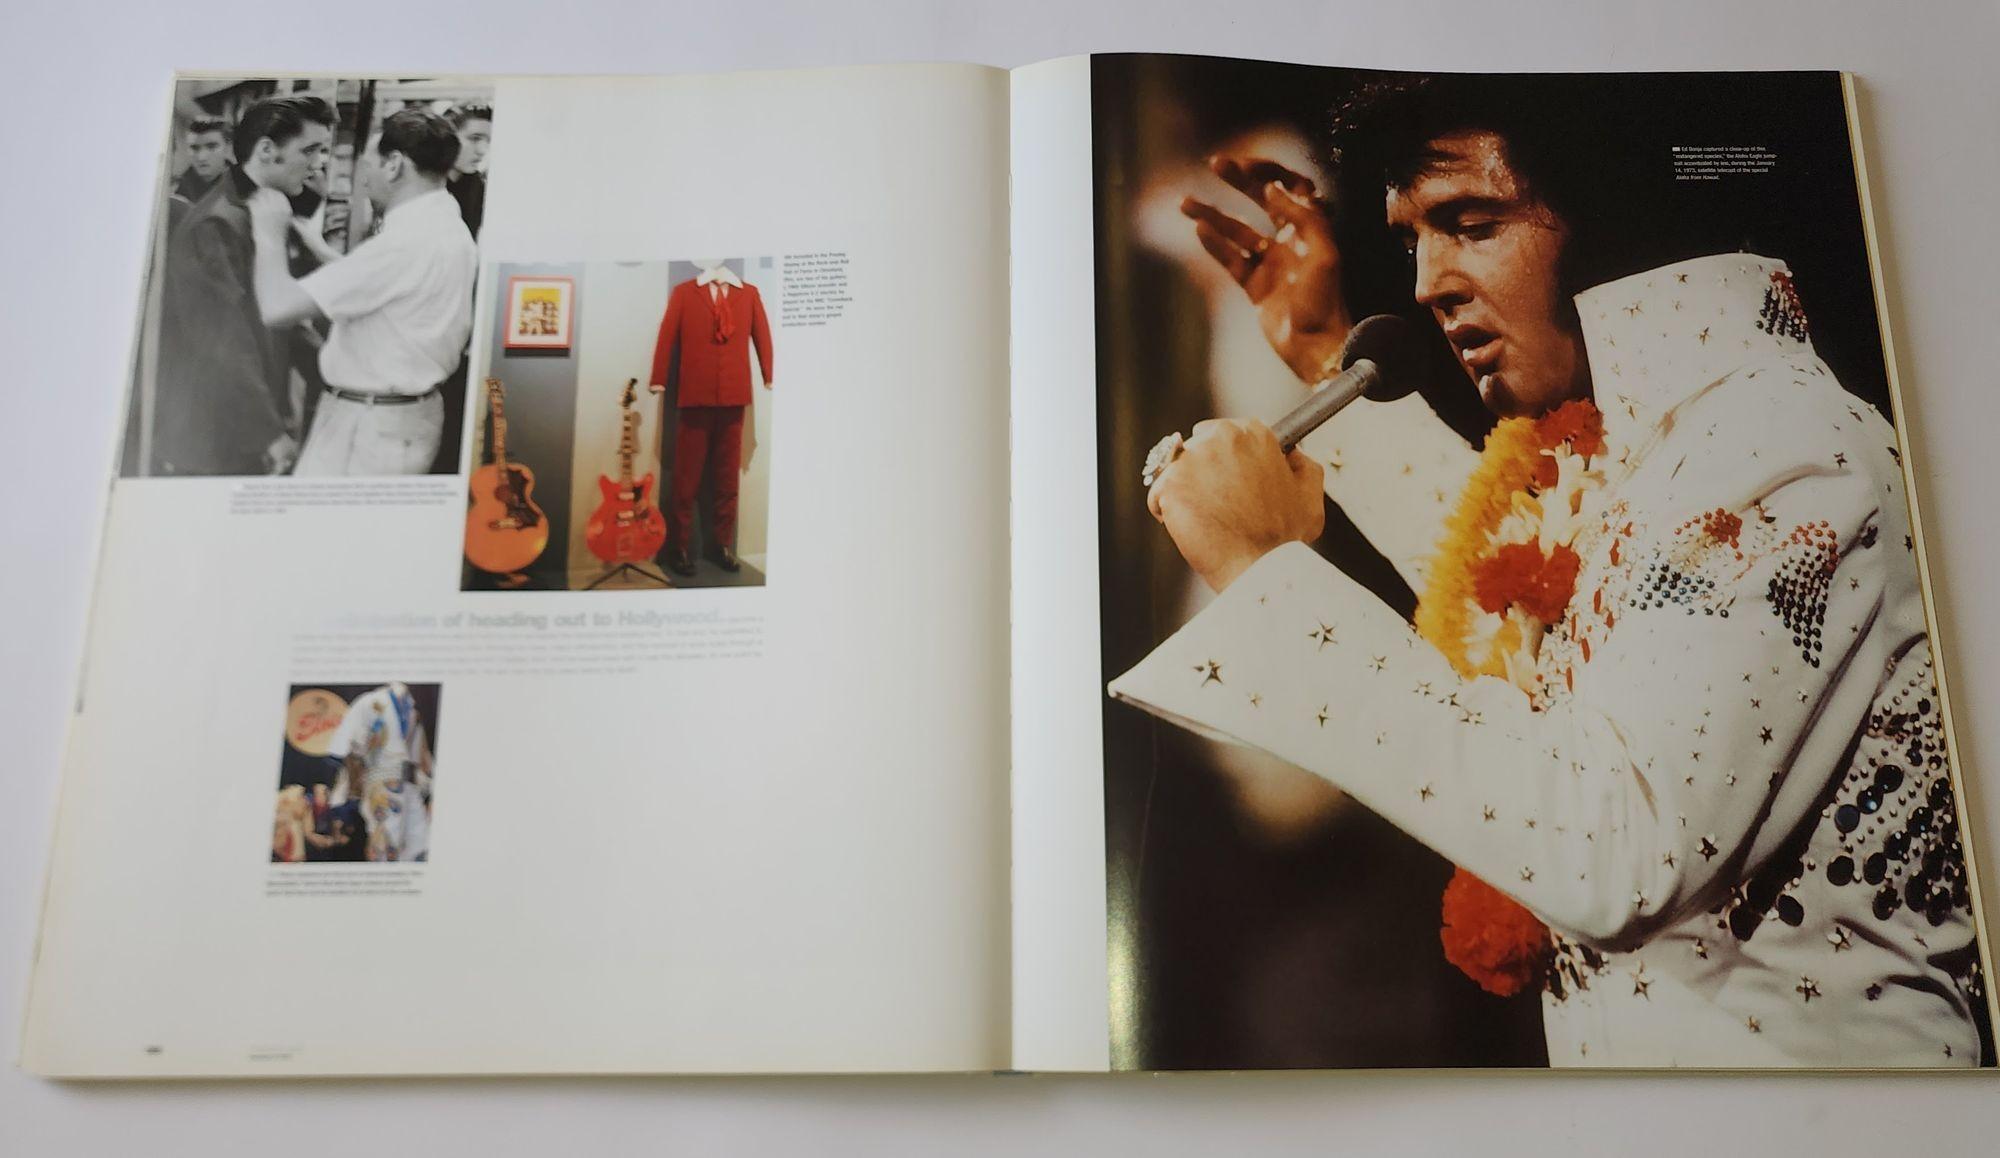 The King by Jim Piazza Elvis Presley - Large size coffee table book For Sale 1